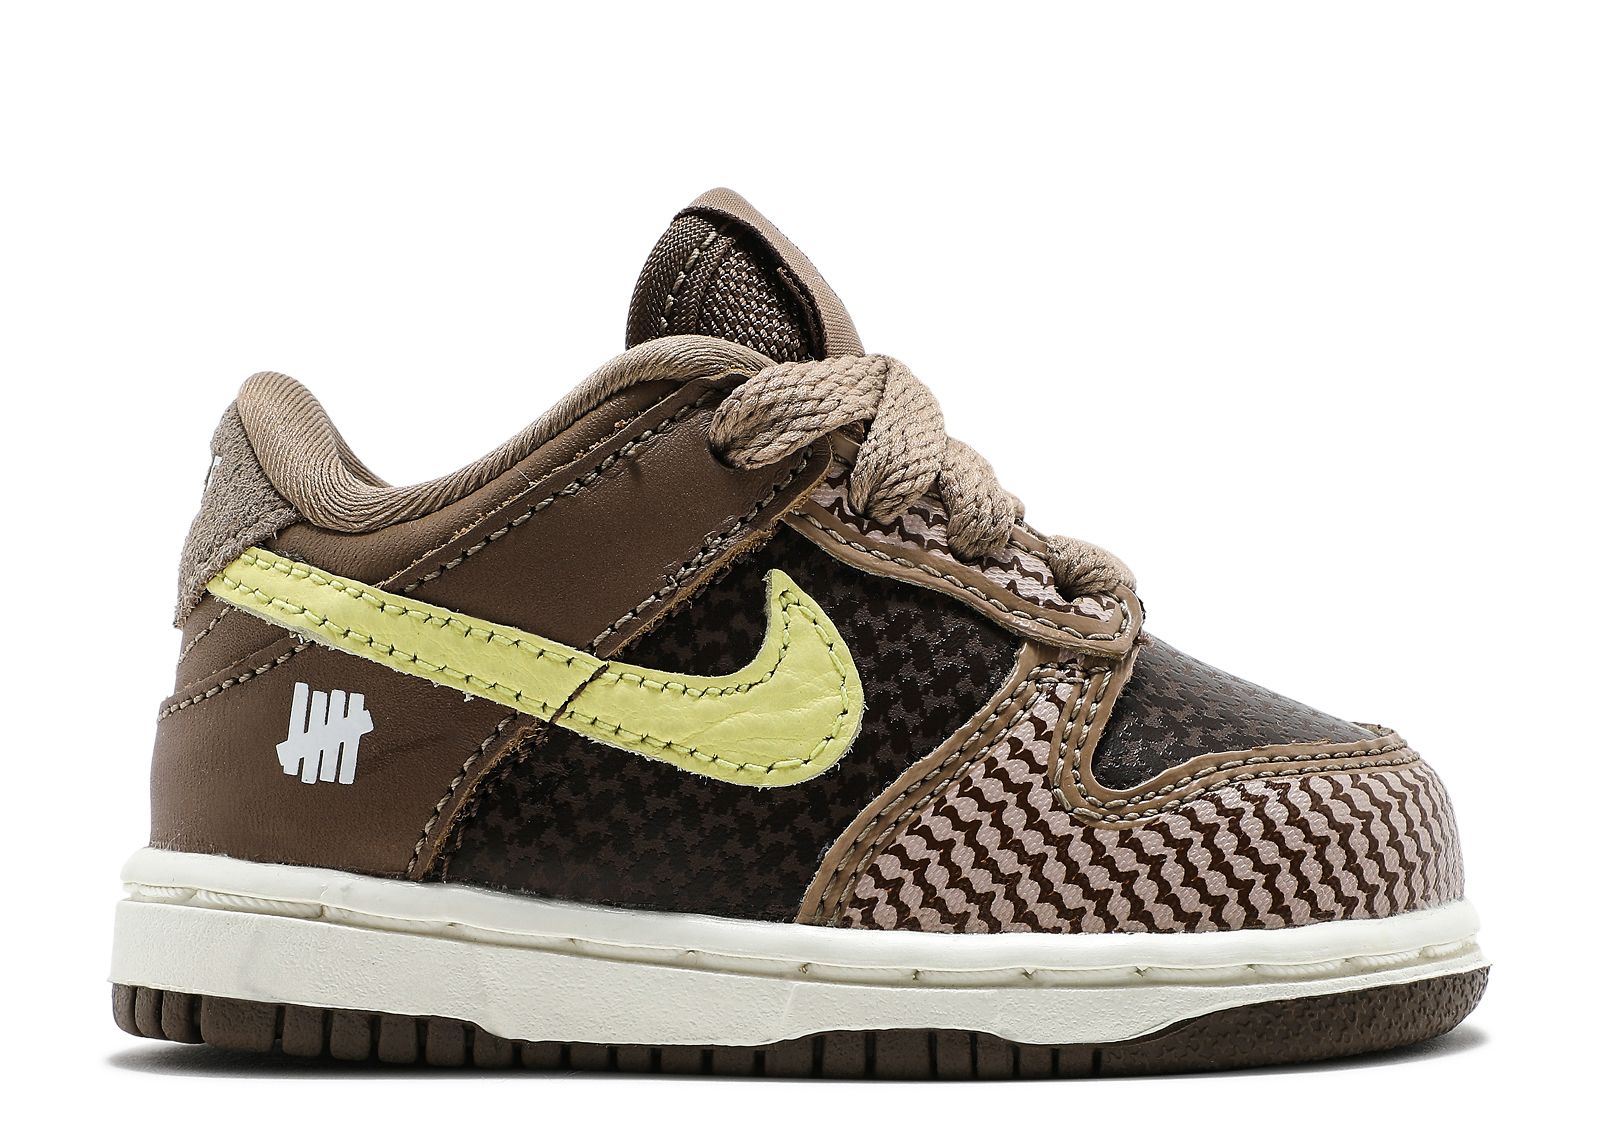 Кроссовки Nike Undefeated X Dunk Low Sp Td 'Canteen', коричневый компакт диски inside out music frost milliontown cd